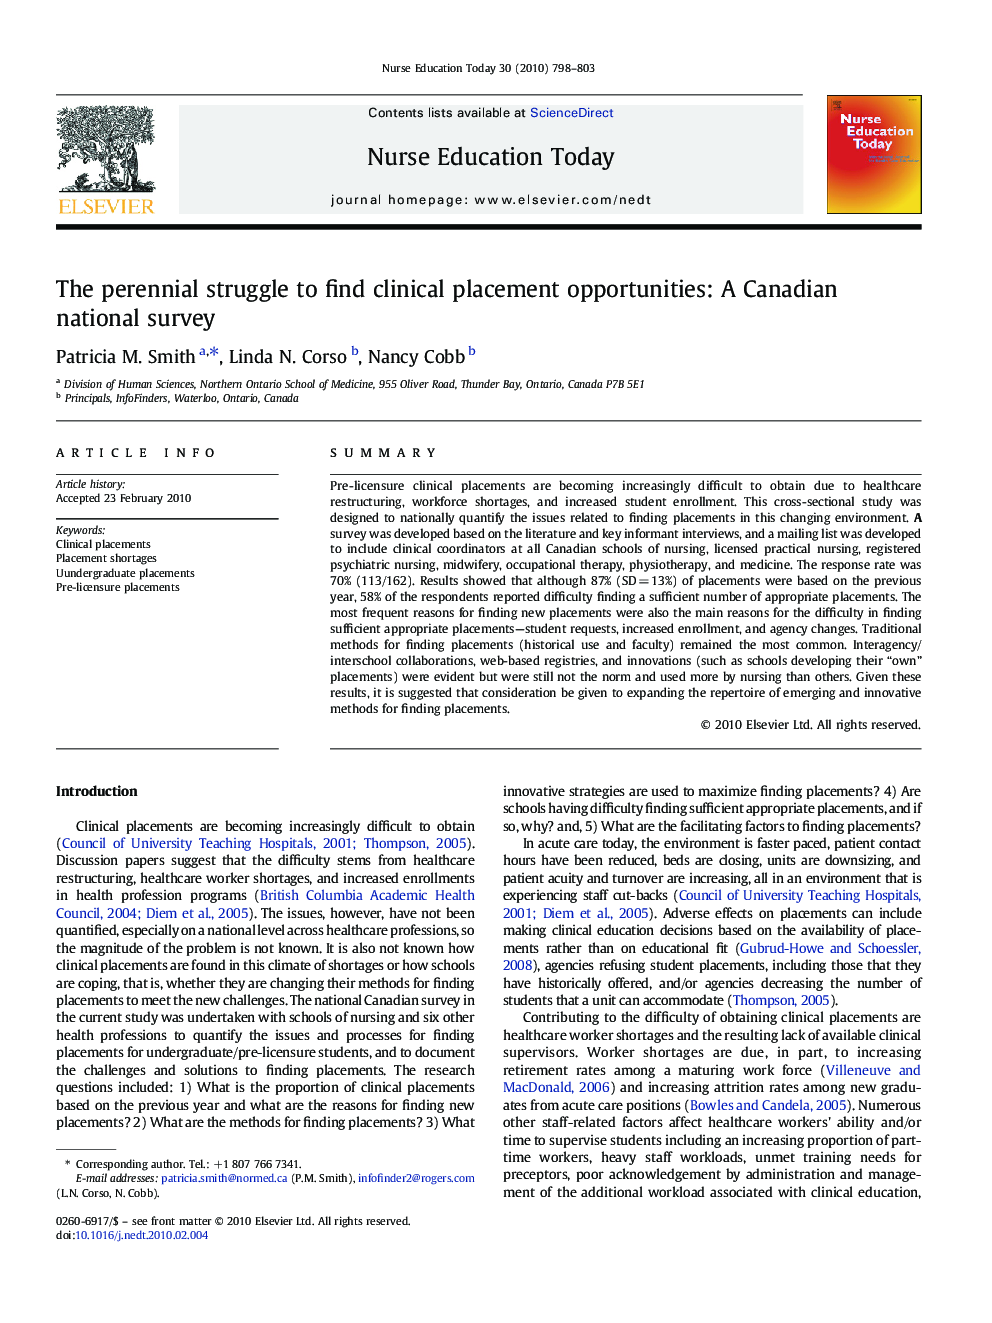 The perennial struggle to find clinical placement opportunities: A Canadian national survey